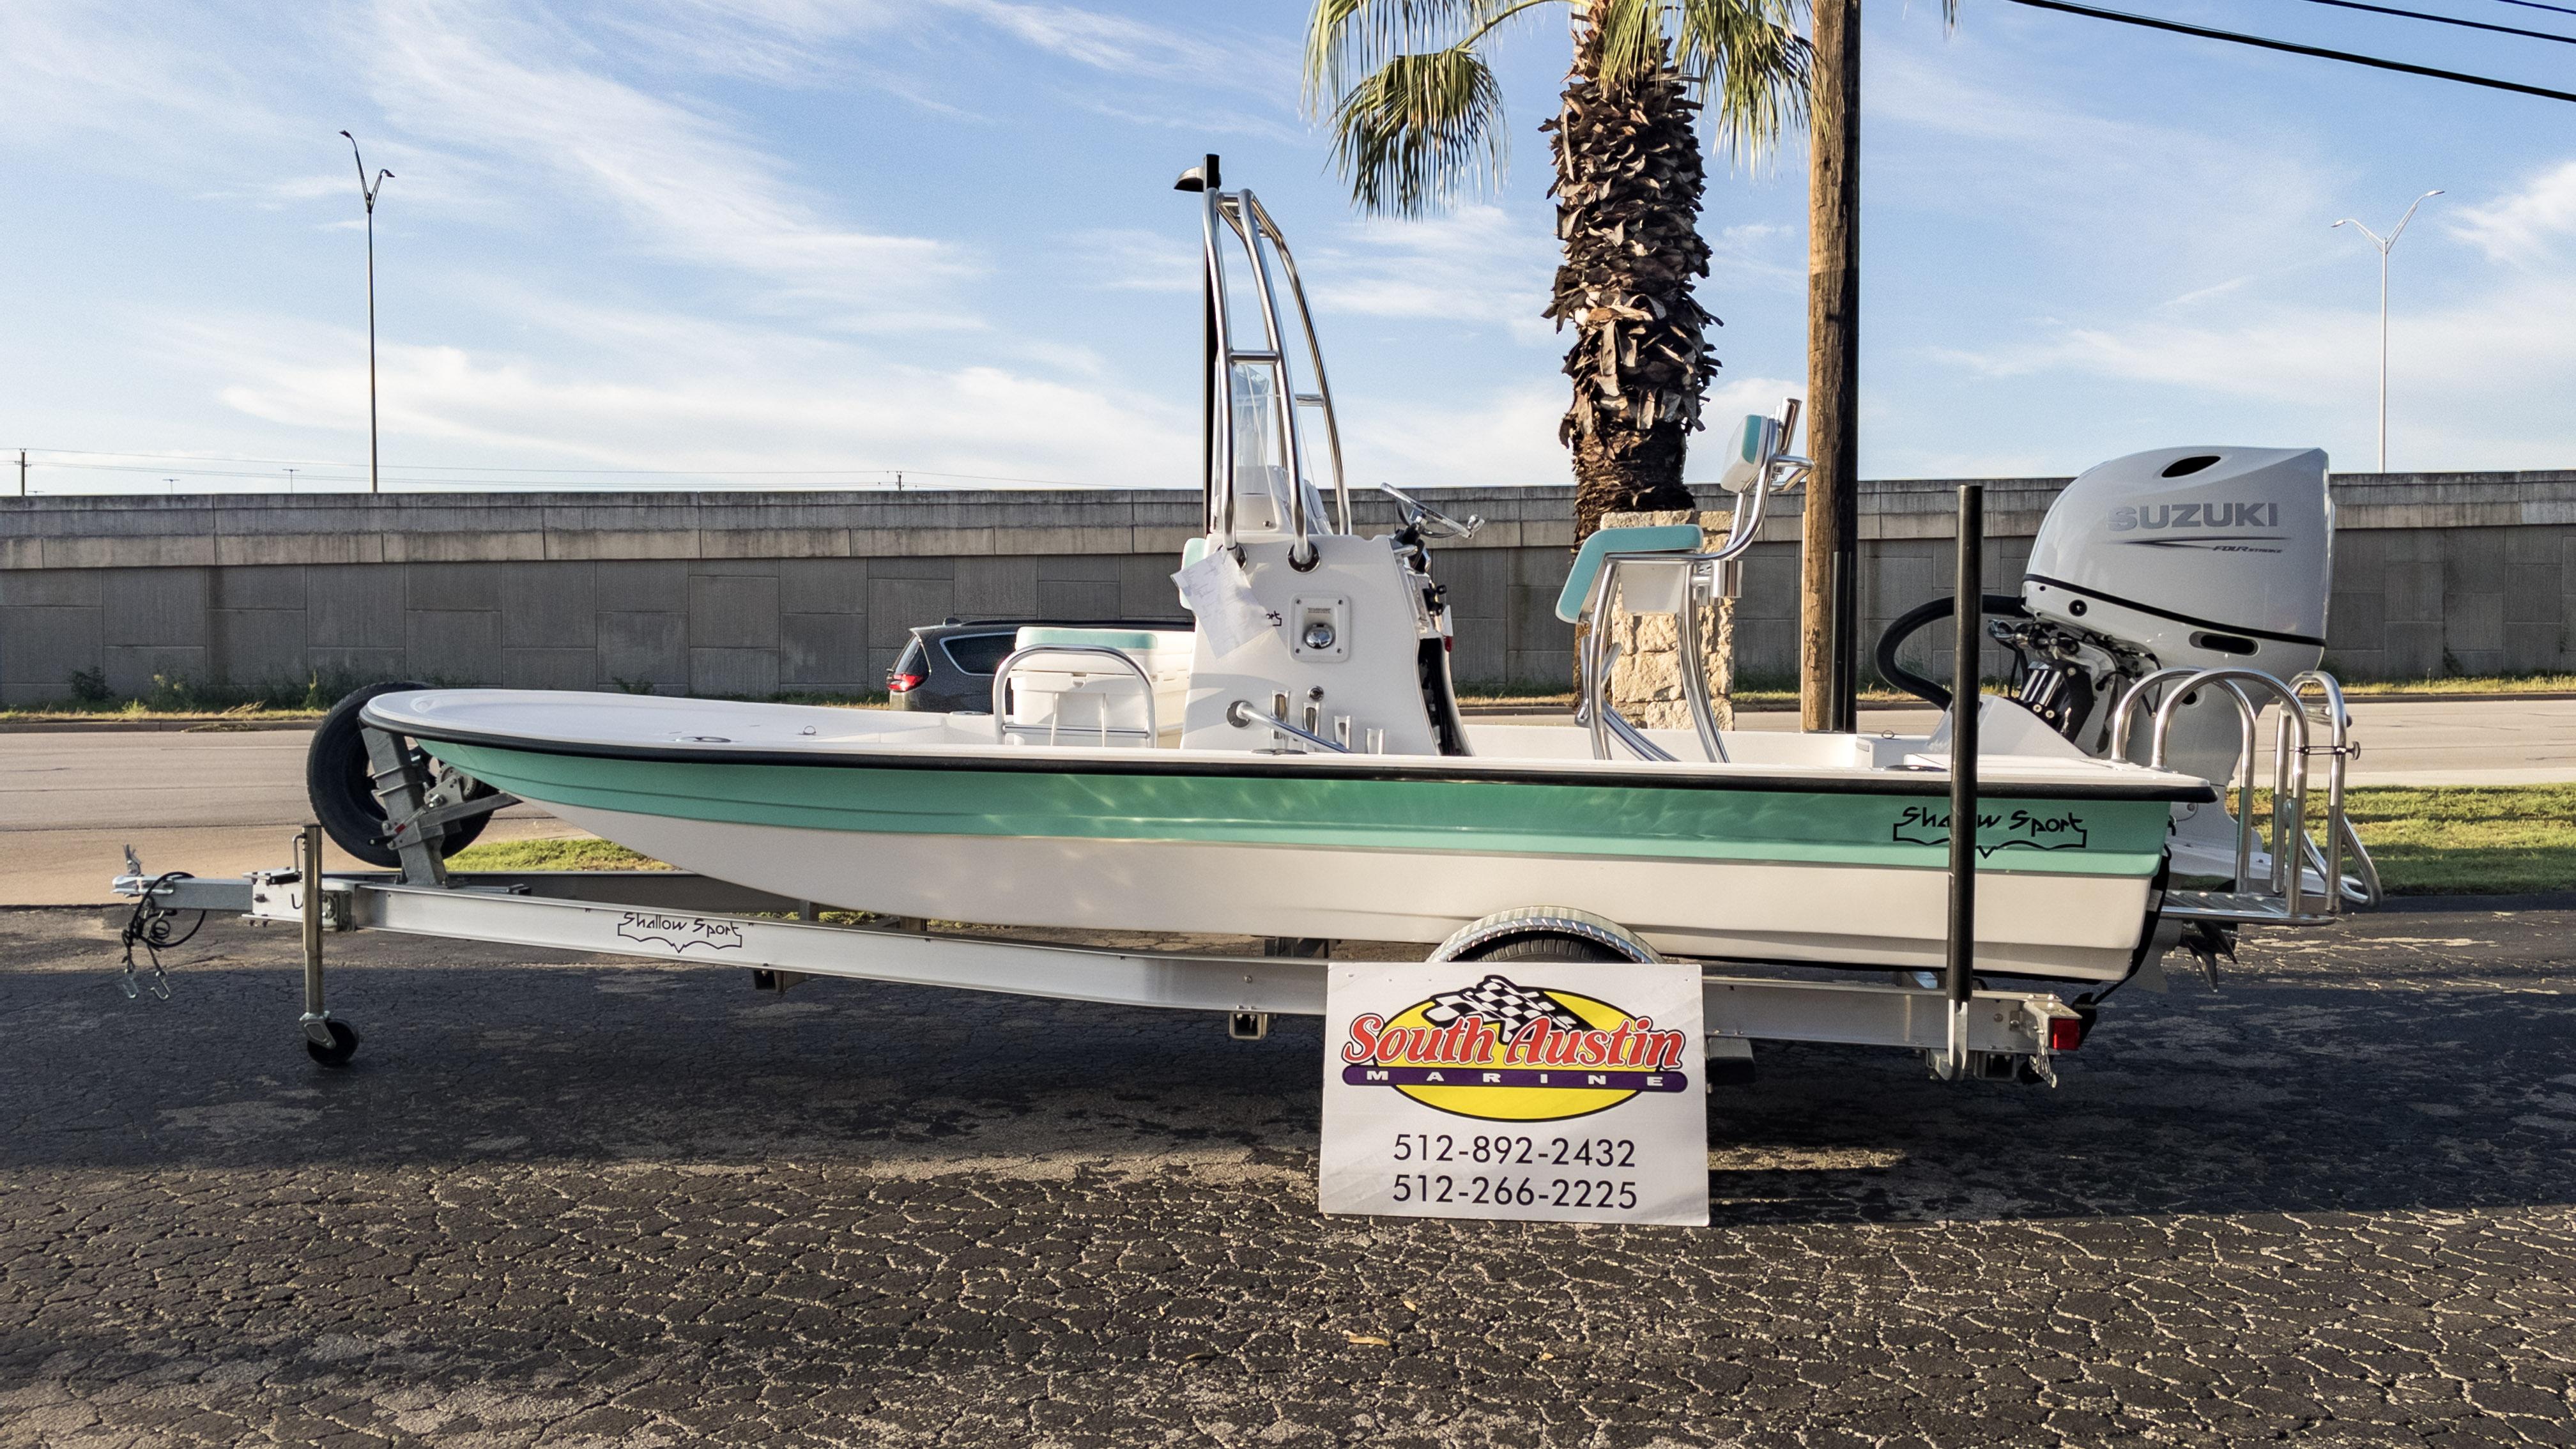 Shallow Stalker boats for sale in Texas - Boat Trader